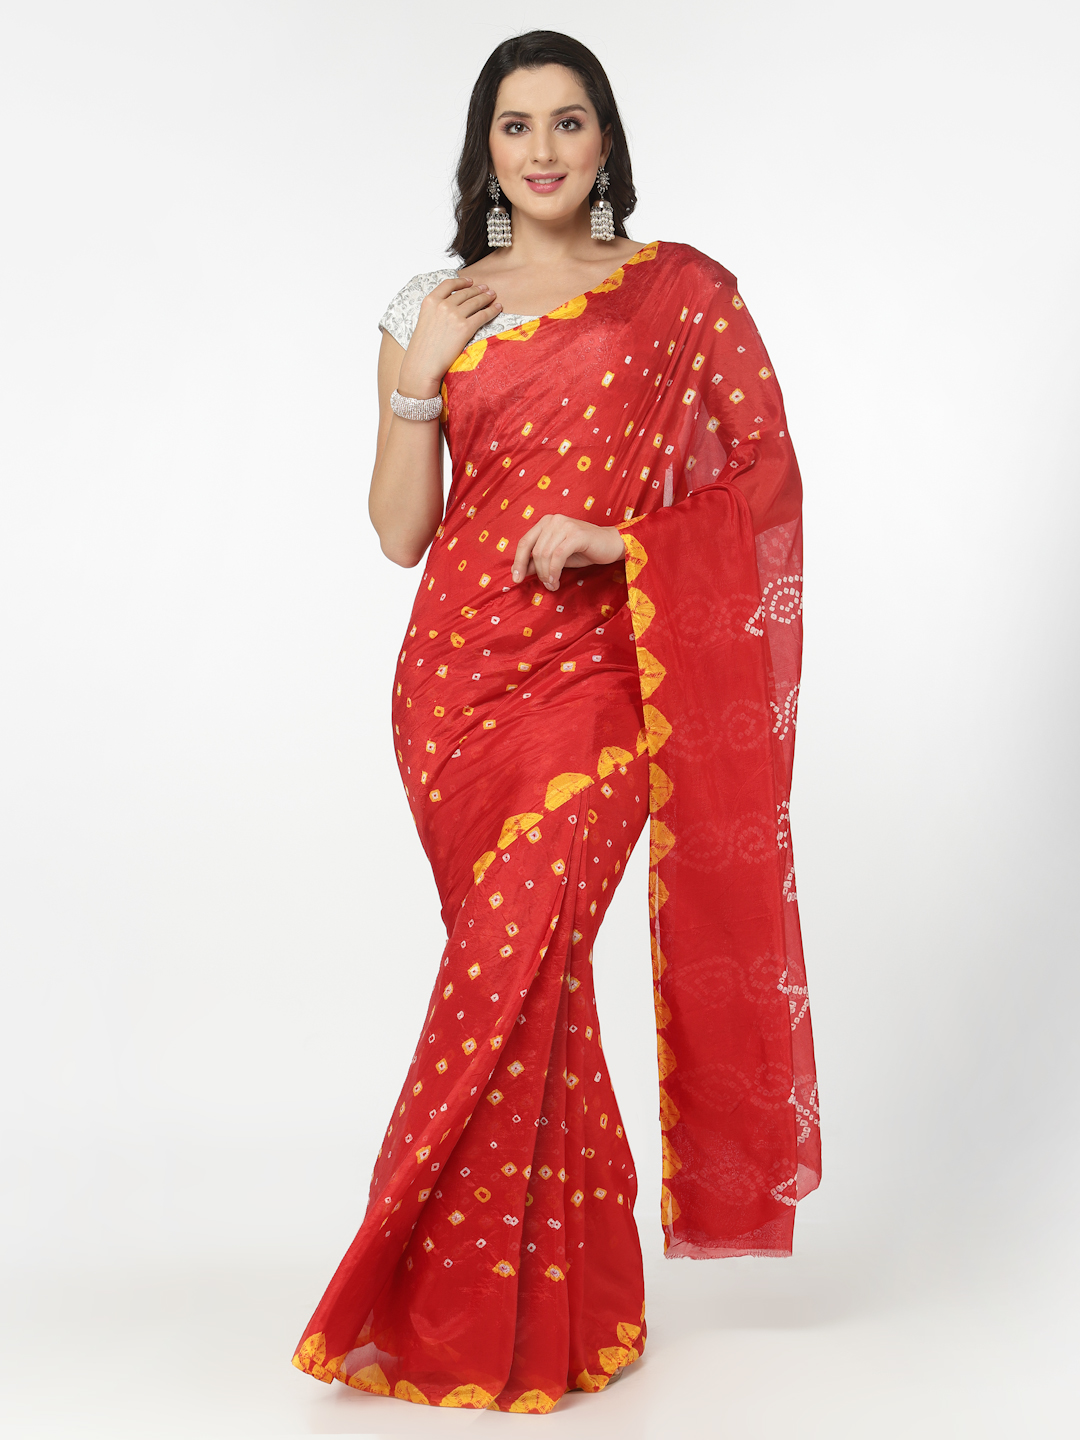 Women Silk Bandhani and Zari Weaving Saree with Unstitched Blouse - Red